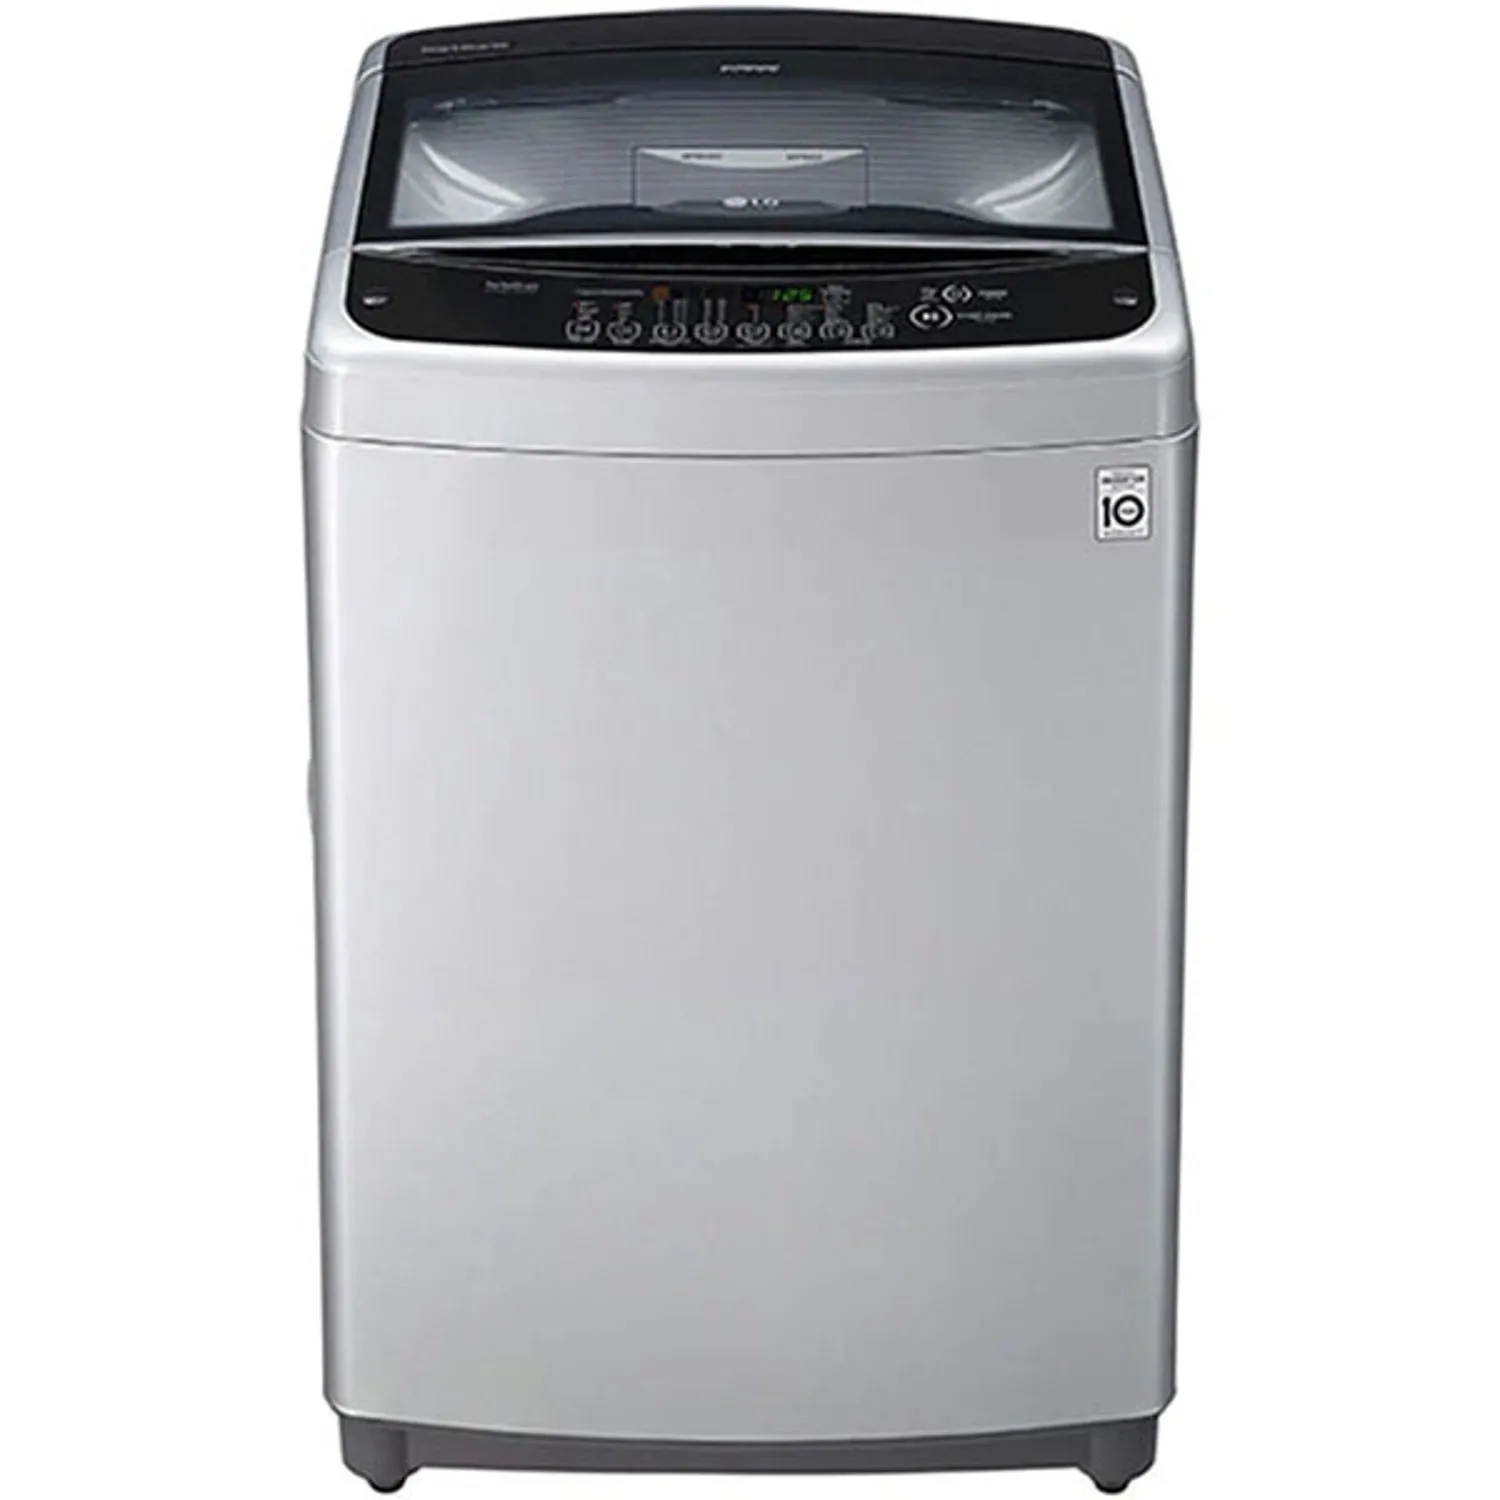 LG 17 Kg Top Load Fully Automatic Washing Machine Smart Inverter Color Silver Model – T1785NEHTE – 1 Year Warranty.